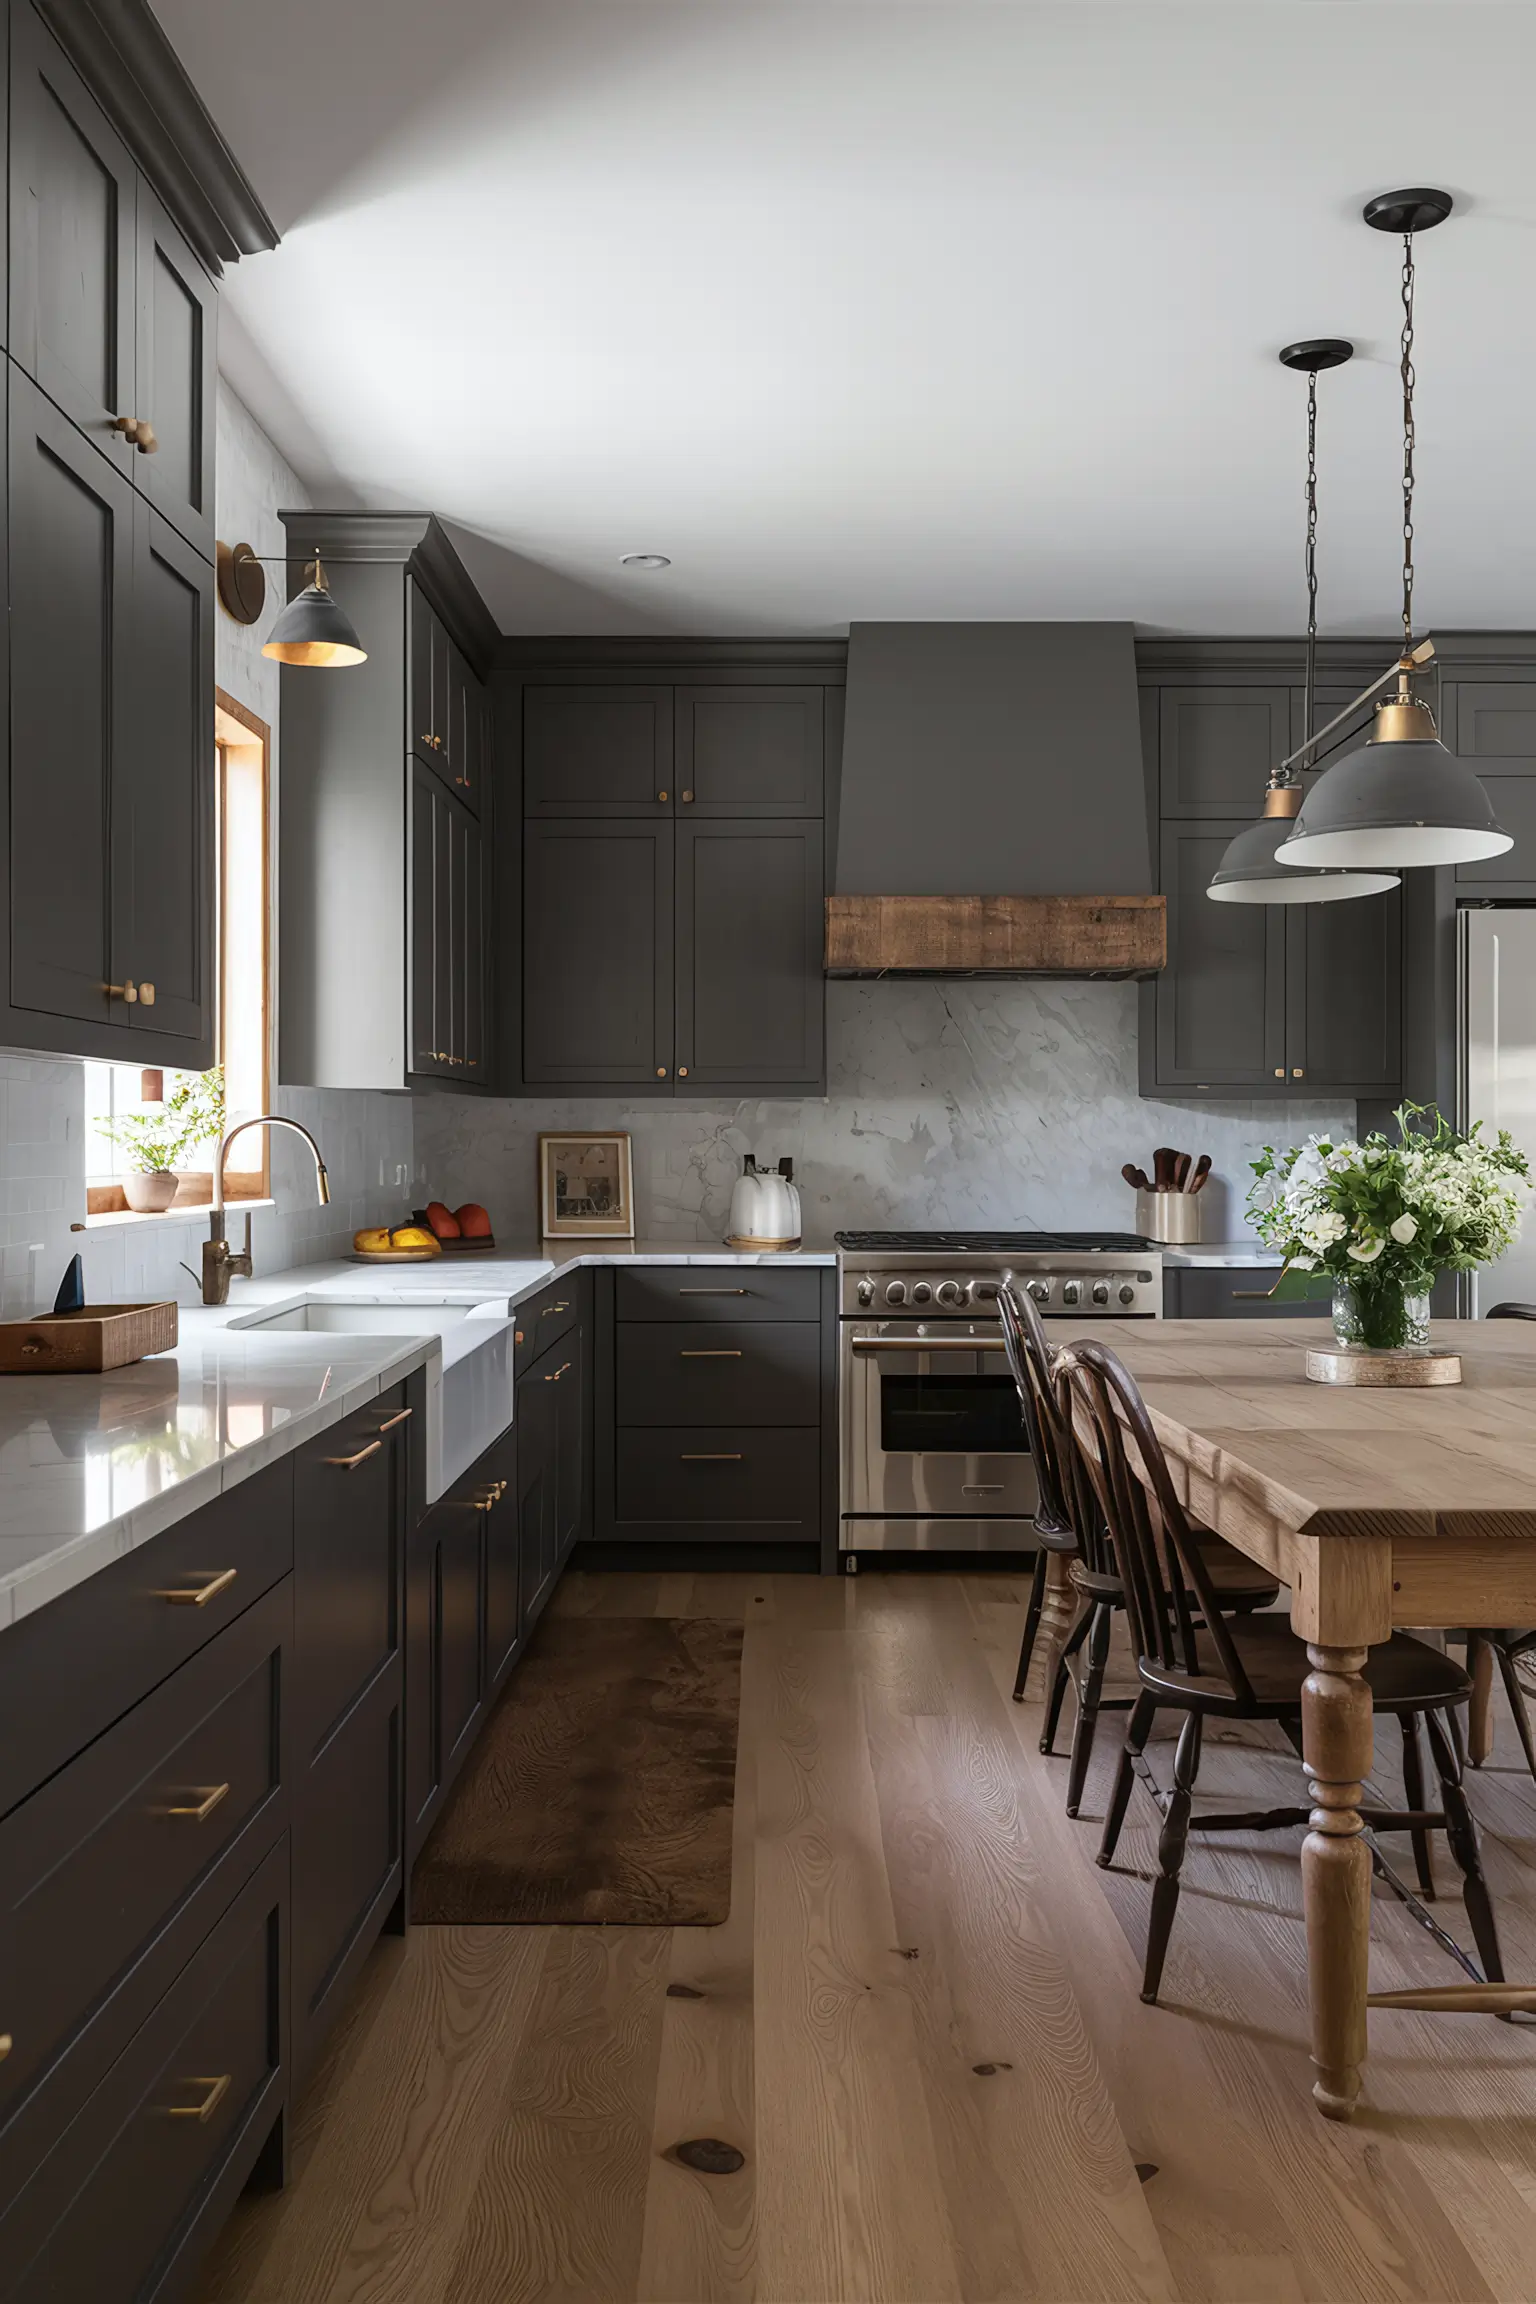 Minimalistic farmhouse kitchen with dark cabinets and rustic modern elements.